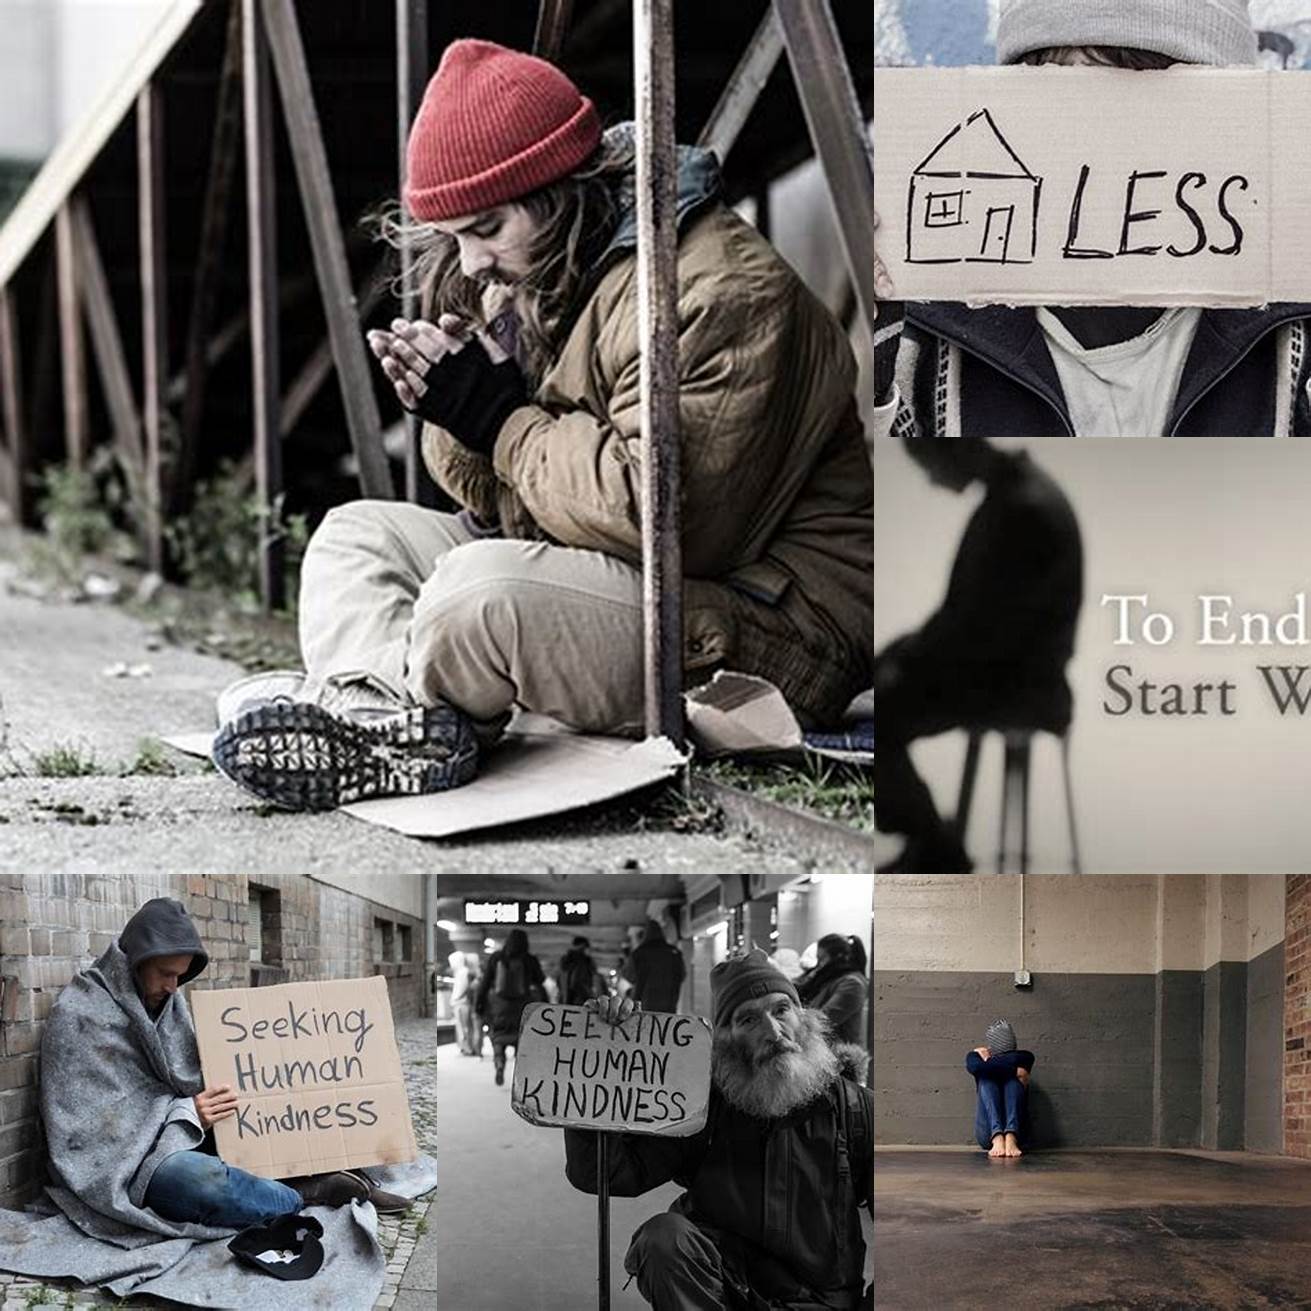 Reduces the stigma associated with poverty and homelessness